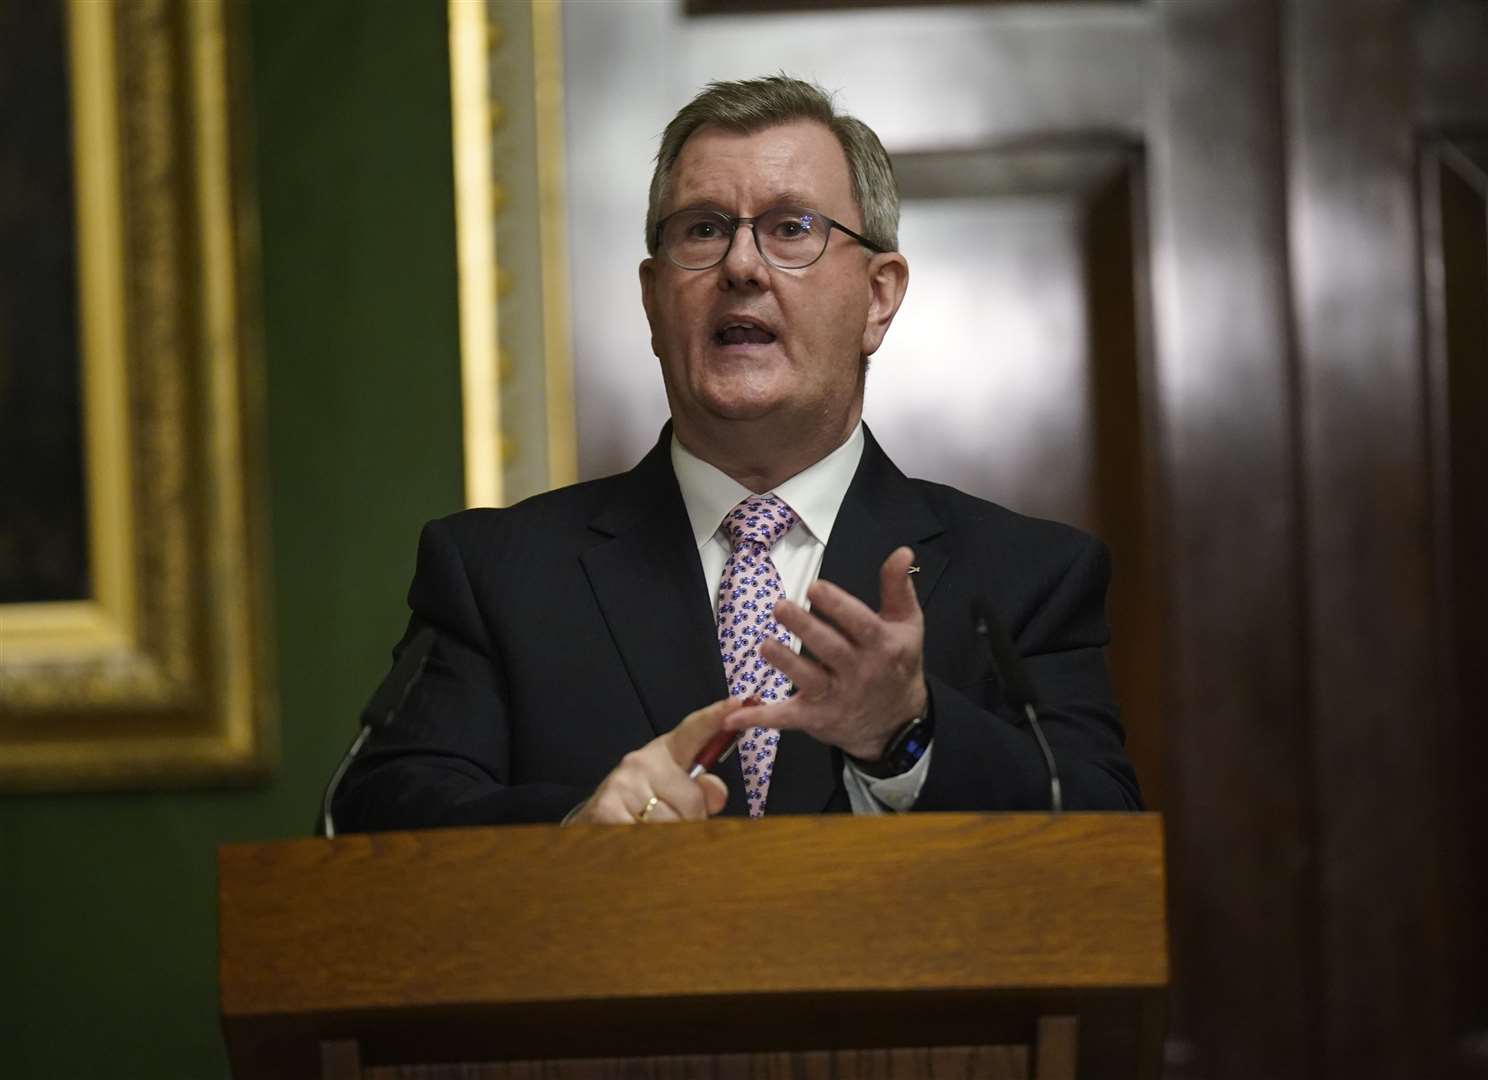 DUP leader Sir Jeffery Donaldson said the vote would be a ‘watershed moment’ for the Assembly (Niall Carson/PA)